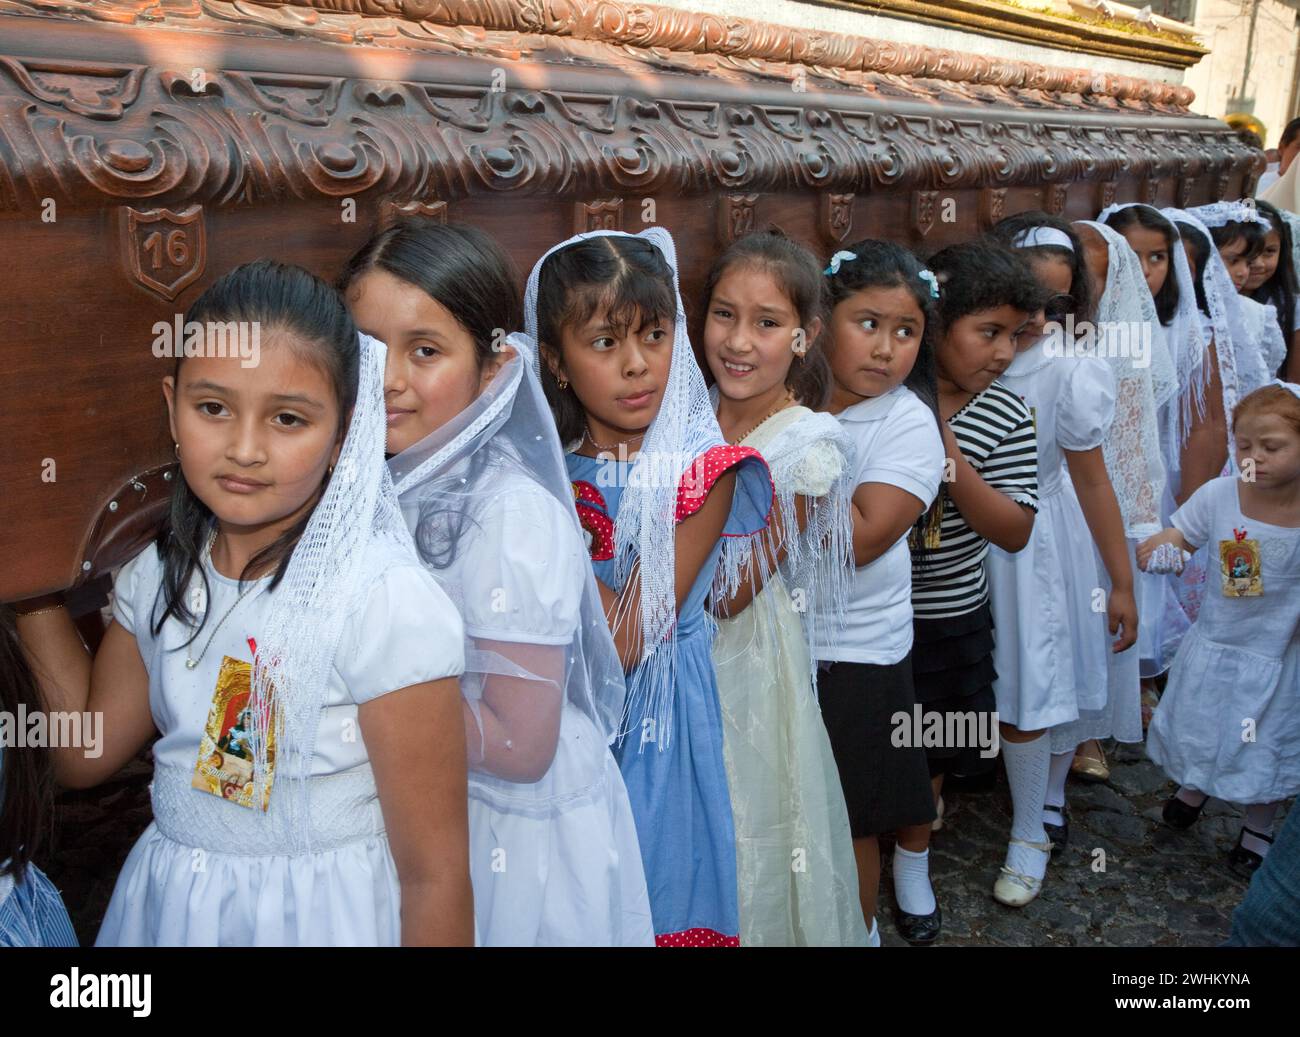 Antigua, Guatemala.  Semana Santa (Holy Week).  Young Girls Carry an Anda (Float) in a Religious Procession. Stock Photo